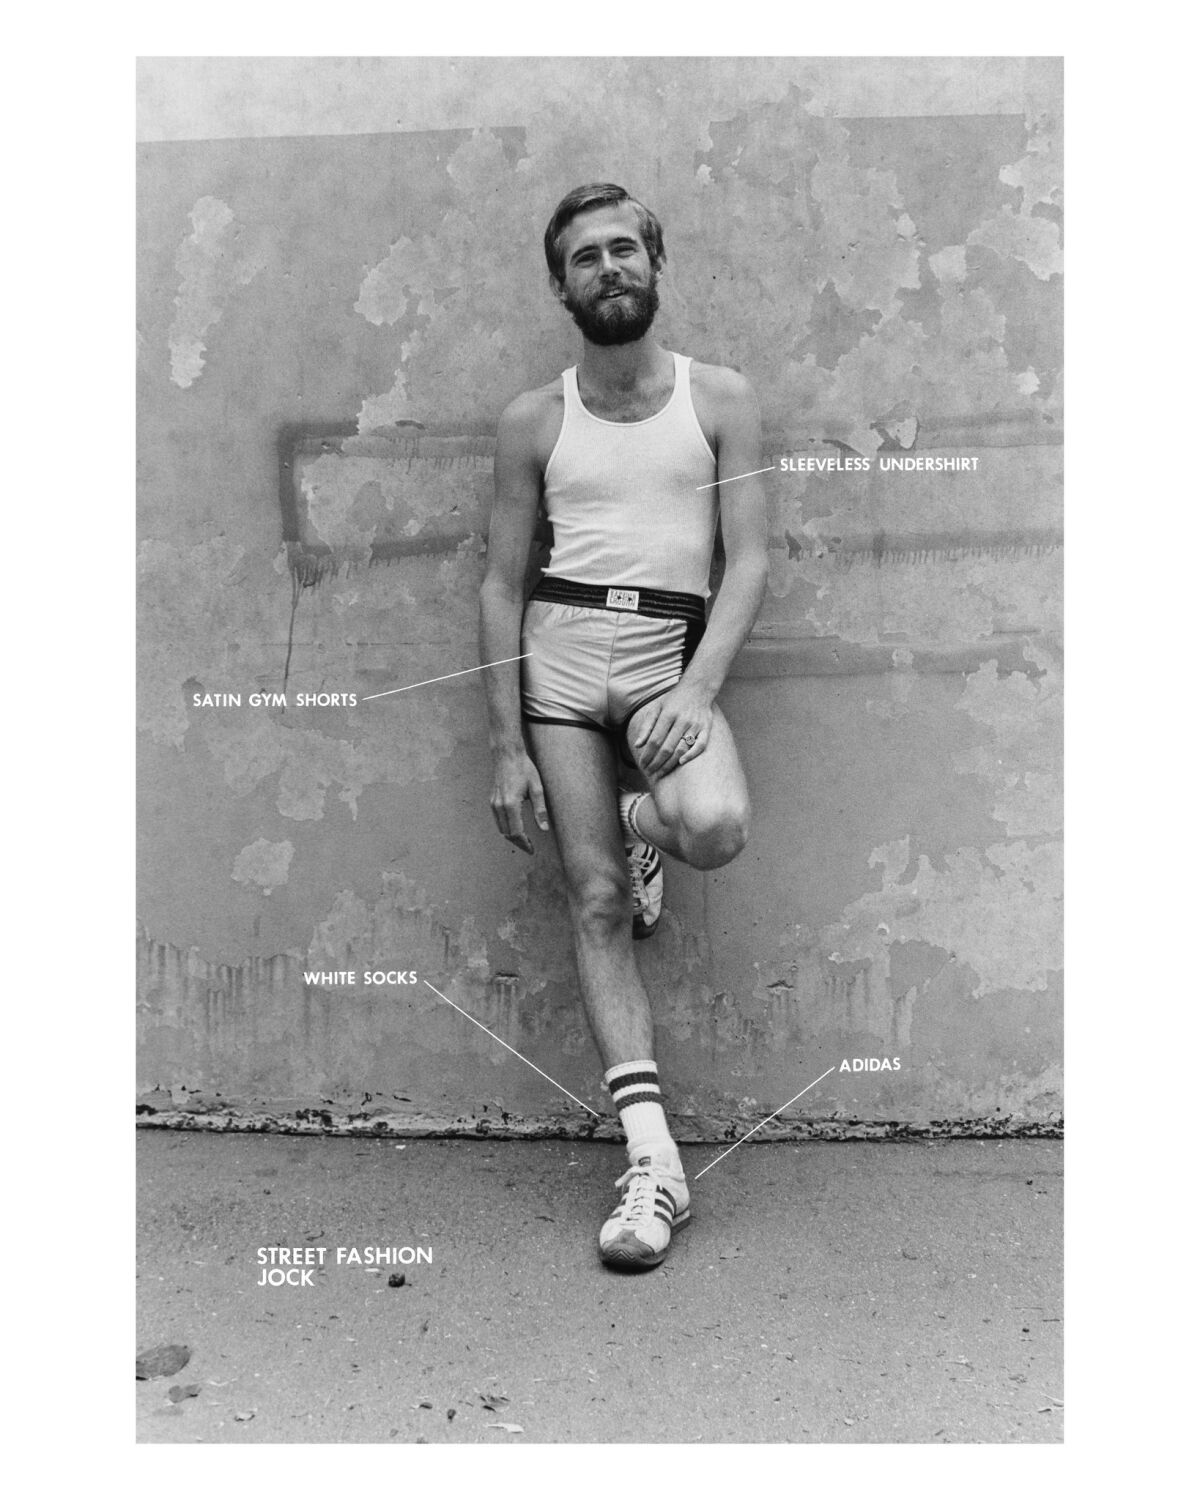 Hal Fischer's "Jock” is part of his "Street Fashion” series from “Gay Semiotics,” 1977, printed in 2014. (Cherry & Martin)